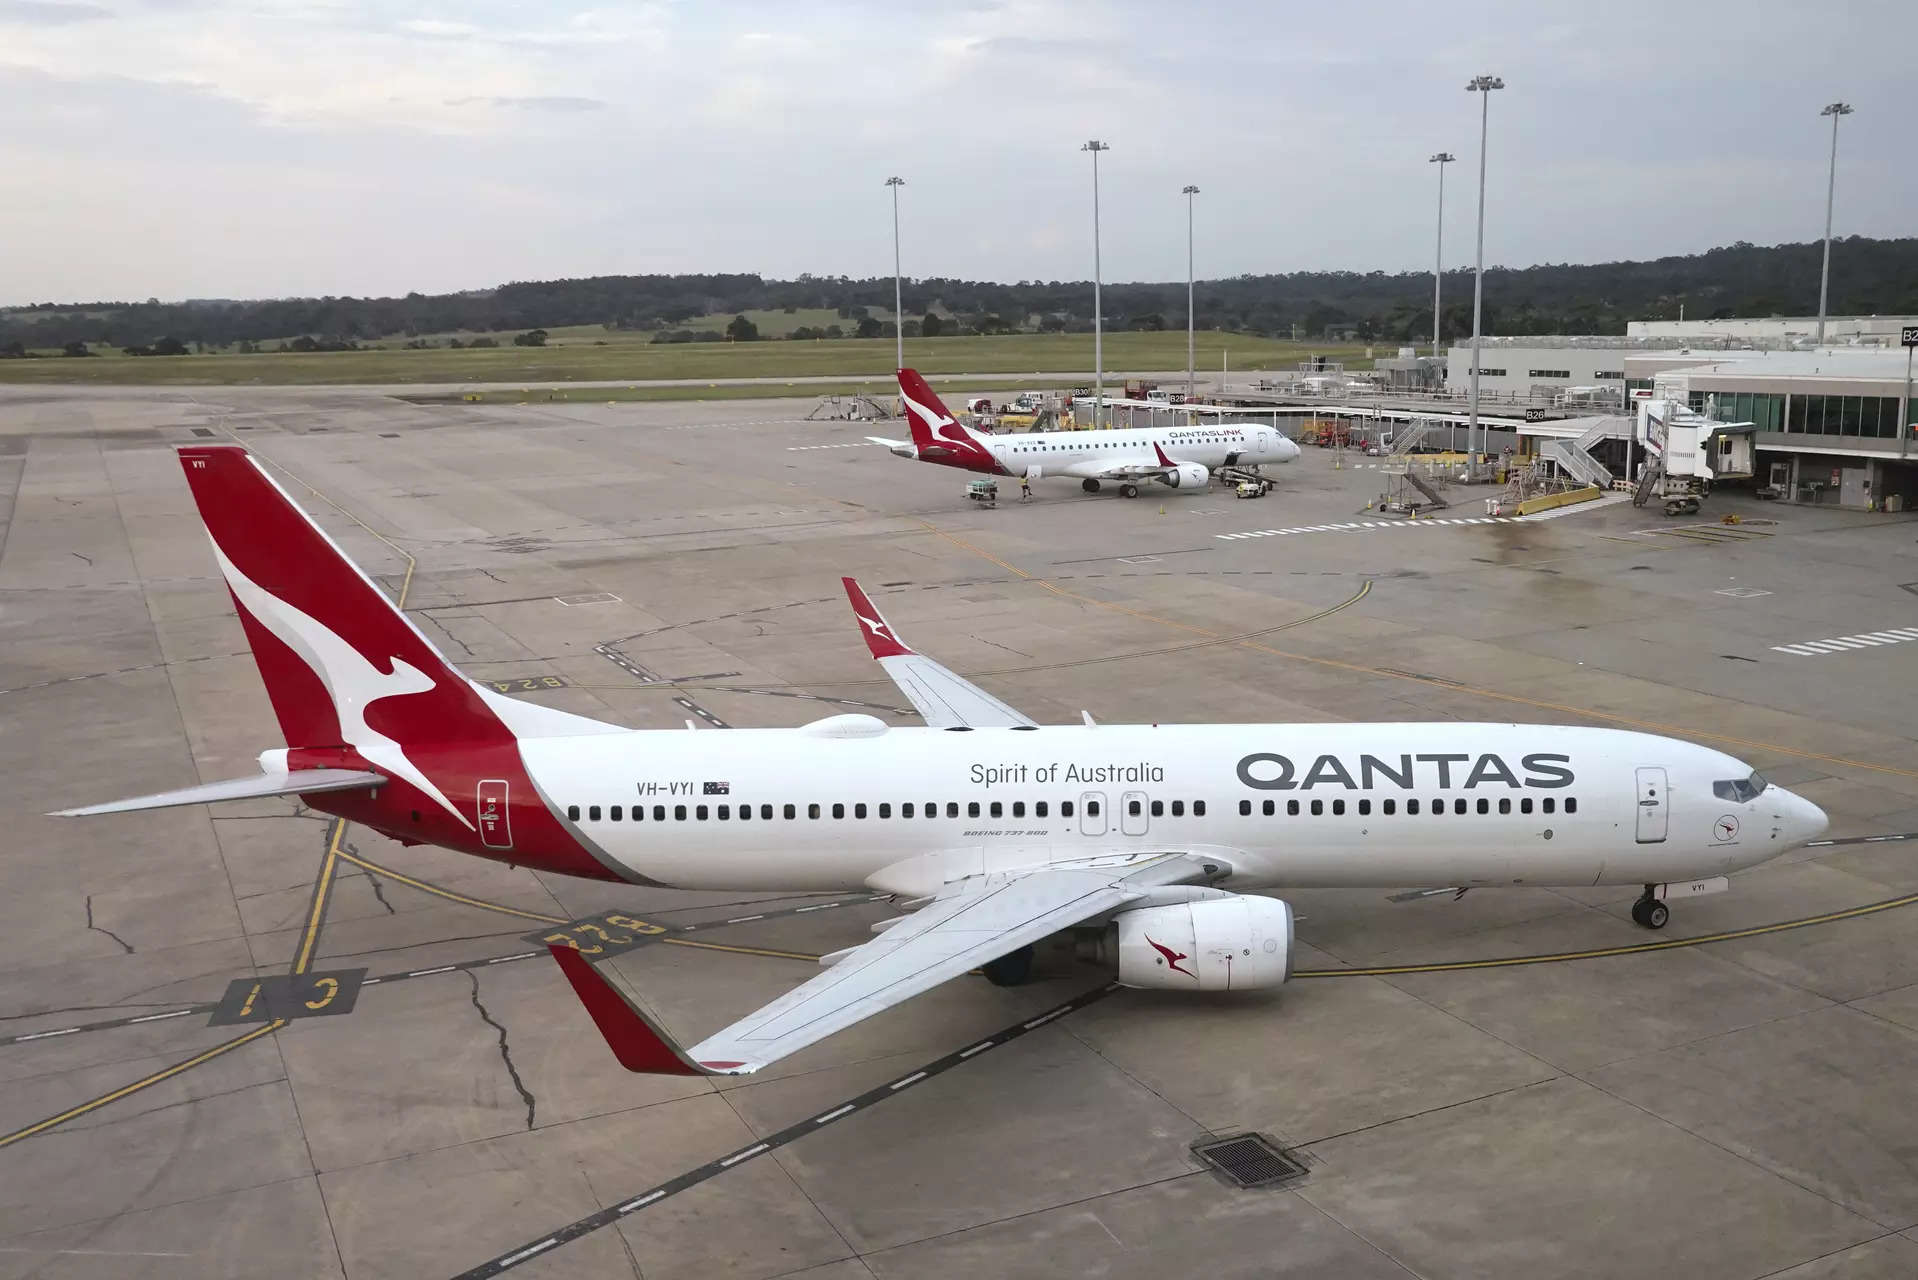 Australian Airline Qantas to pay USD 79 million in compensation and fine  over 'ghost flights' scandal